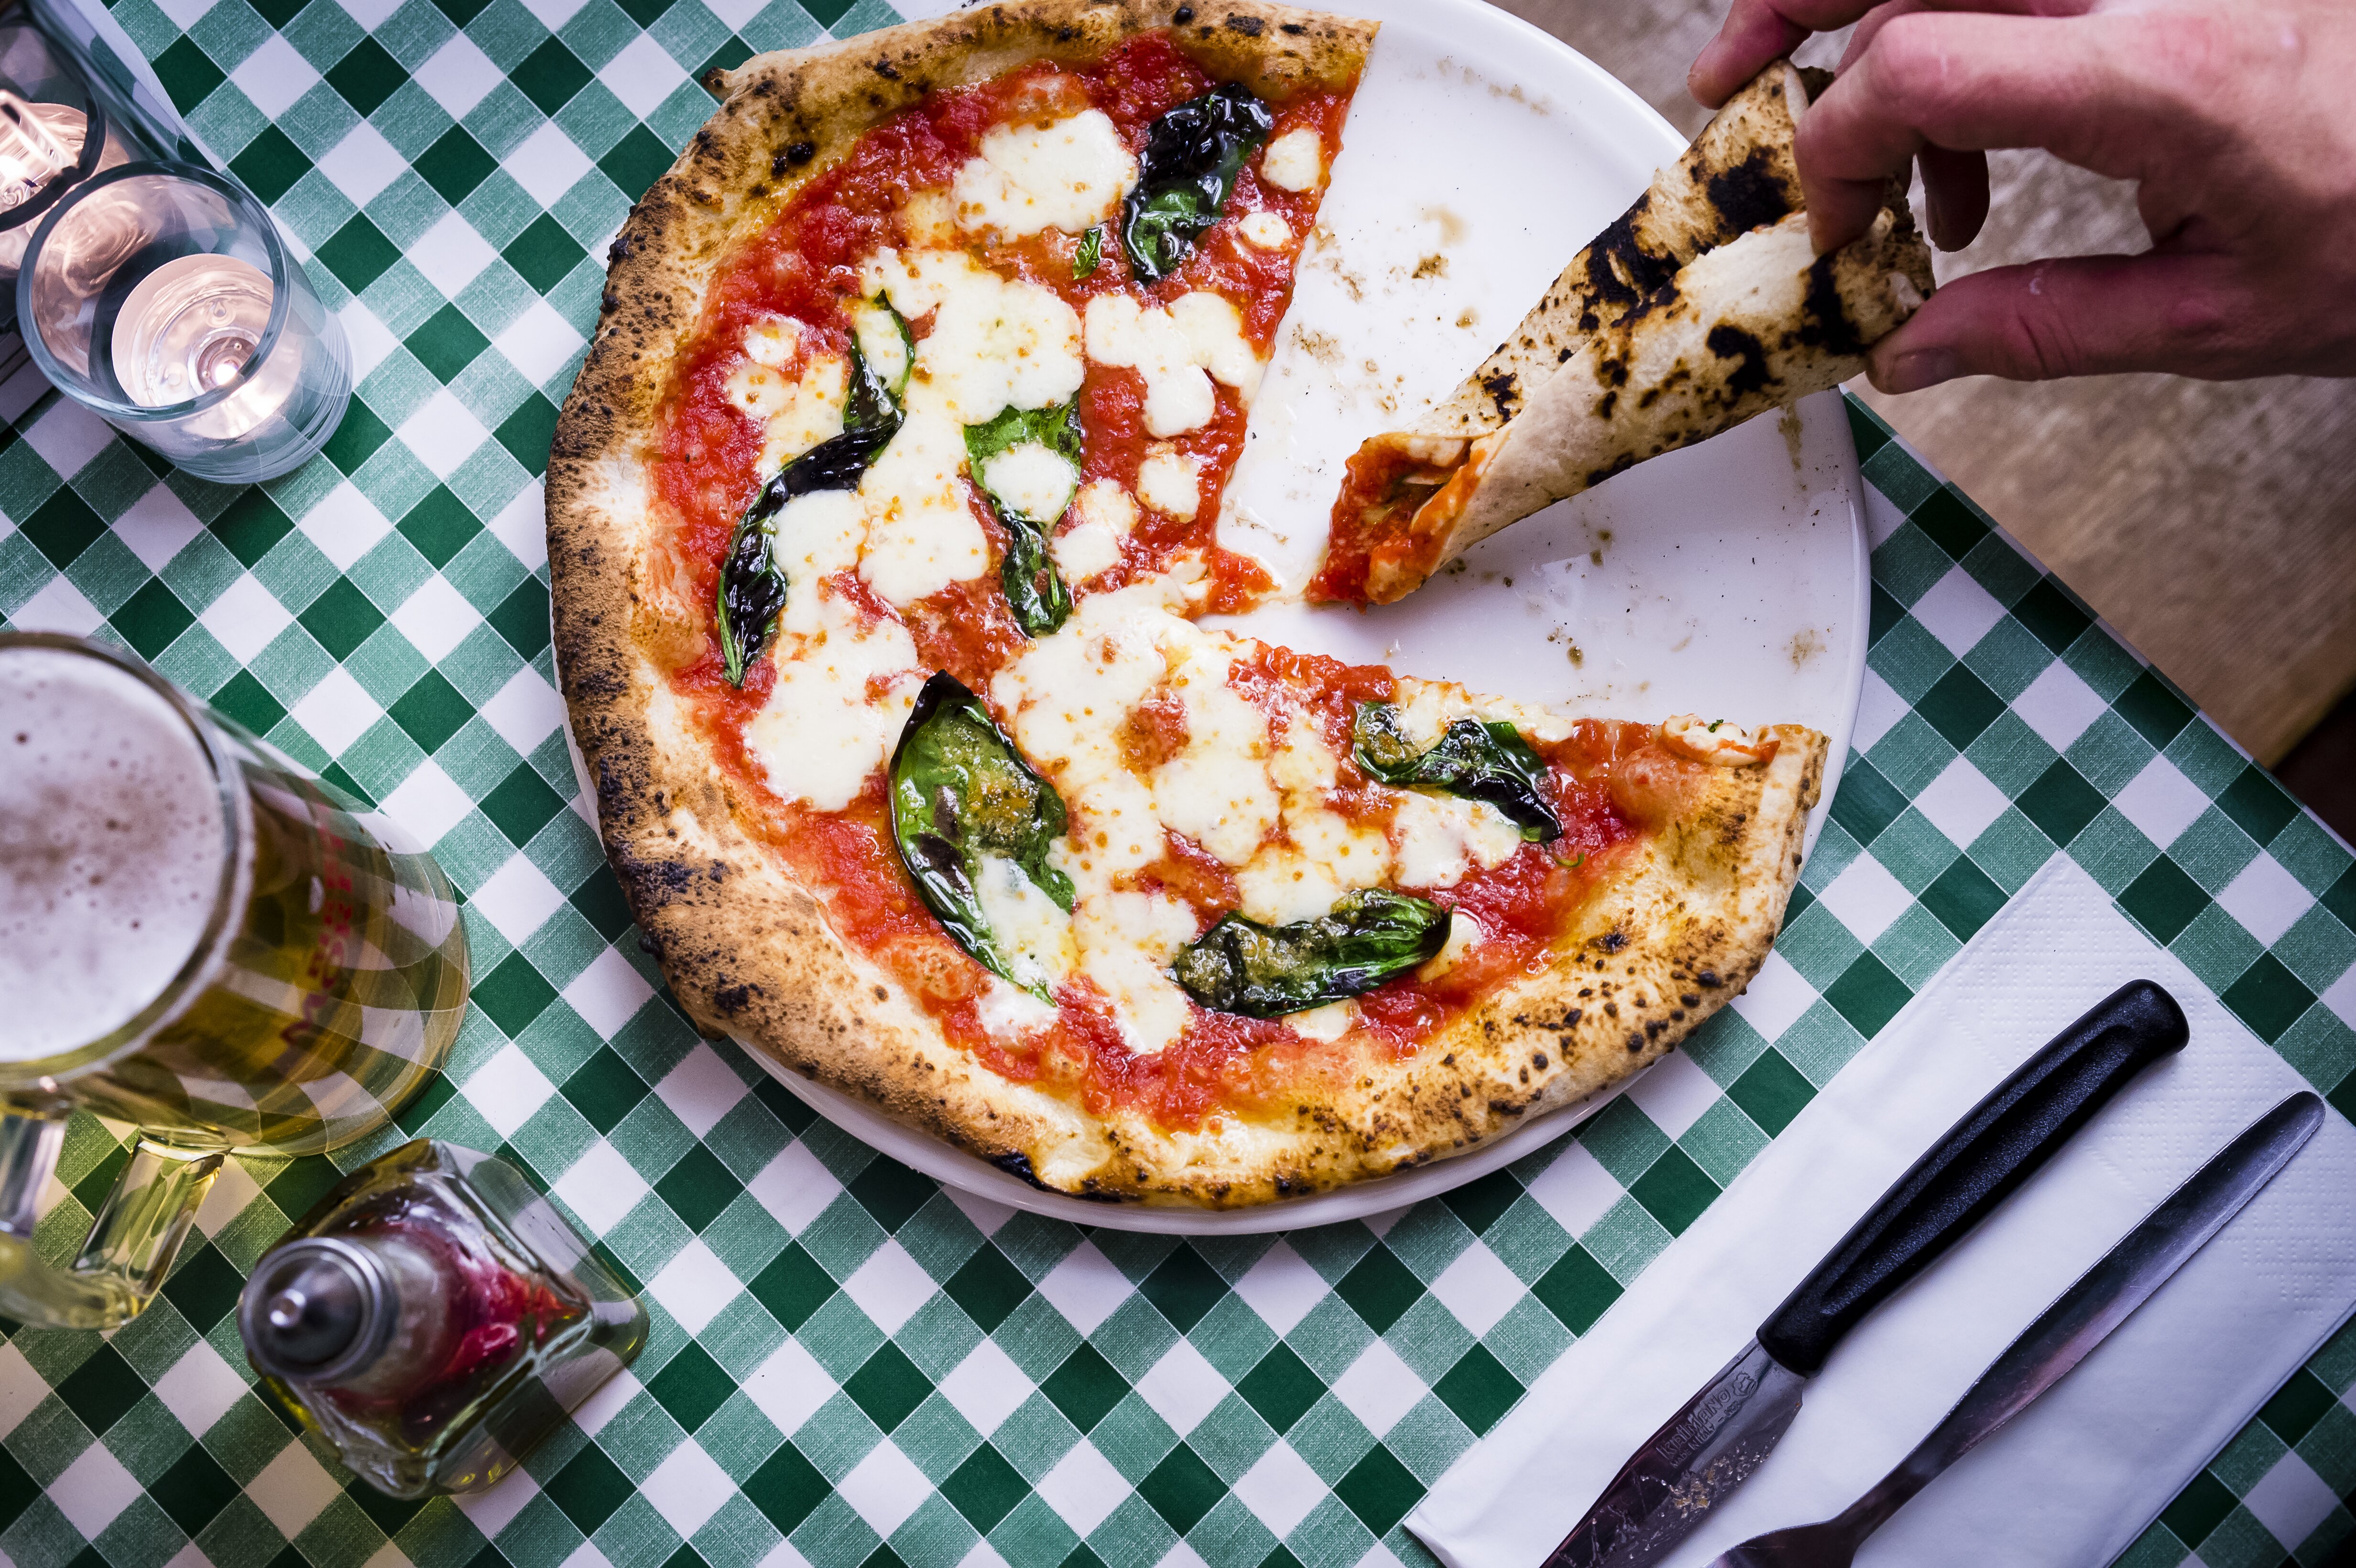 Deliveroo and Pizza Pilgrims to offer discounts and incentives to drive vaccine uptake among young people